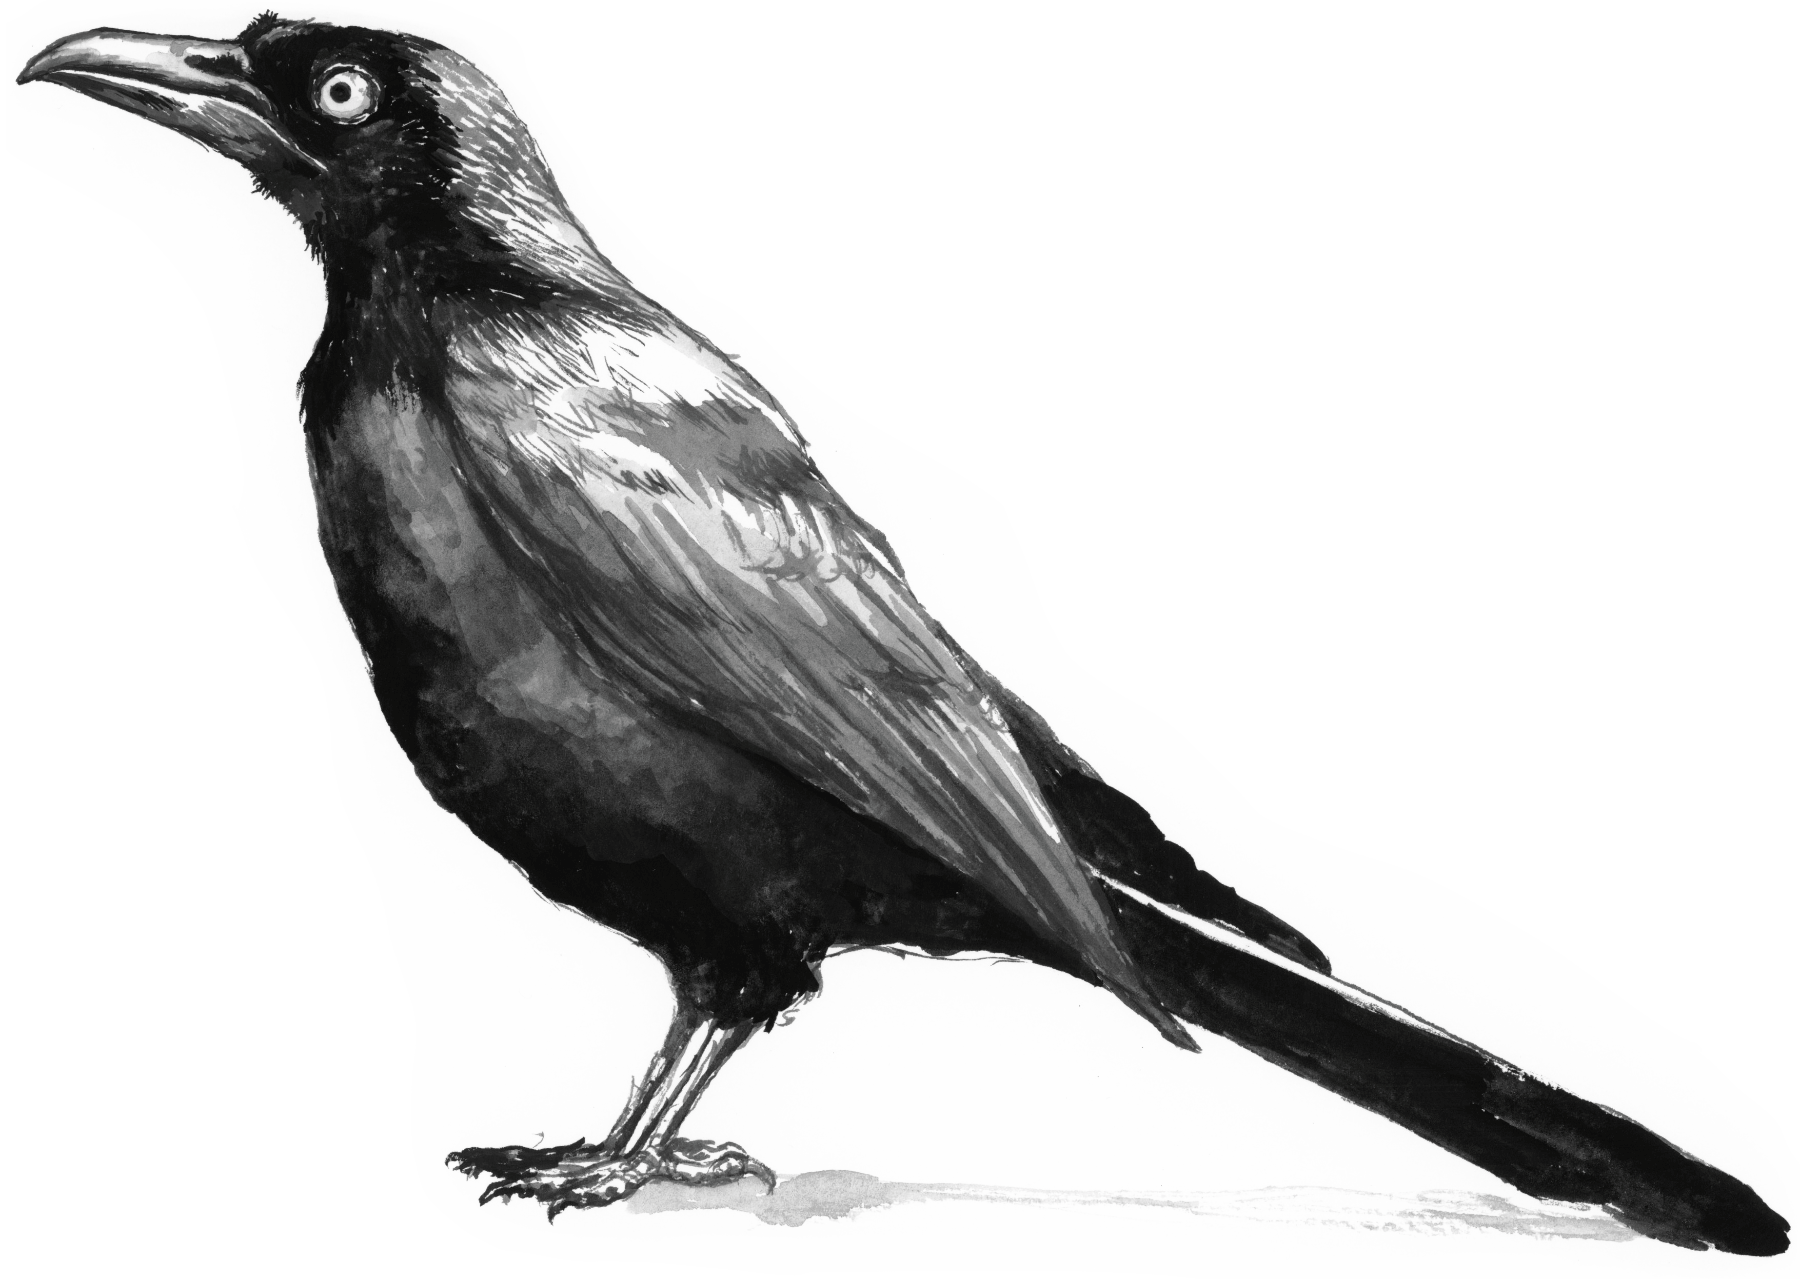 An illustration of a large black grackle looking to the left